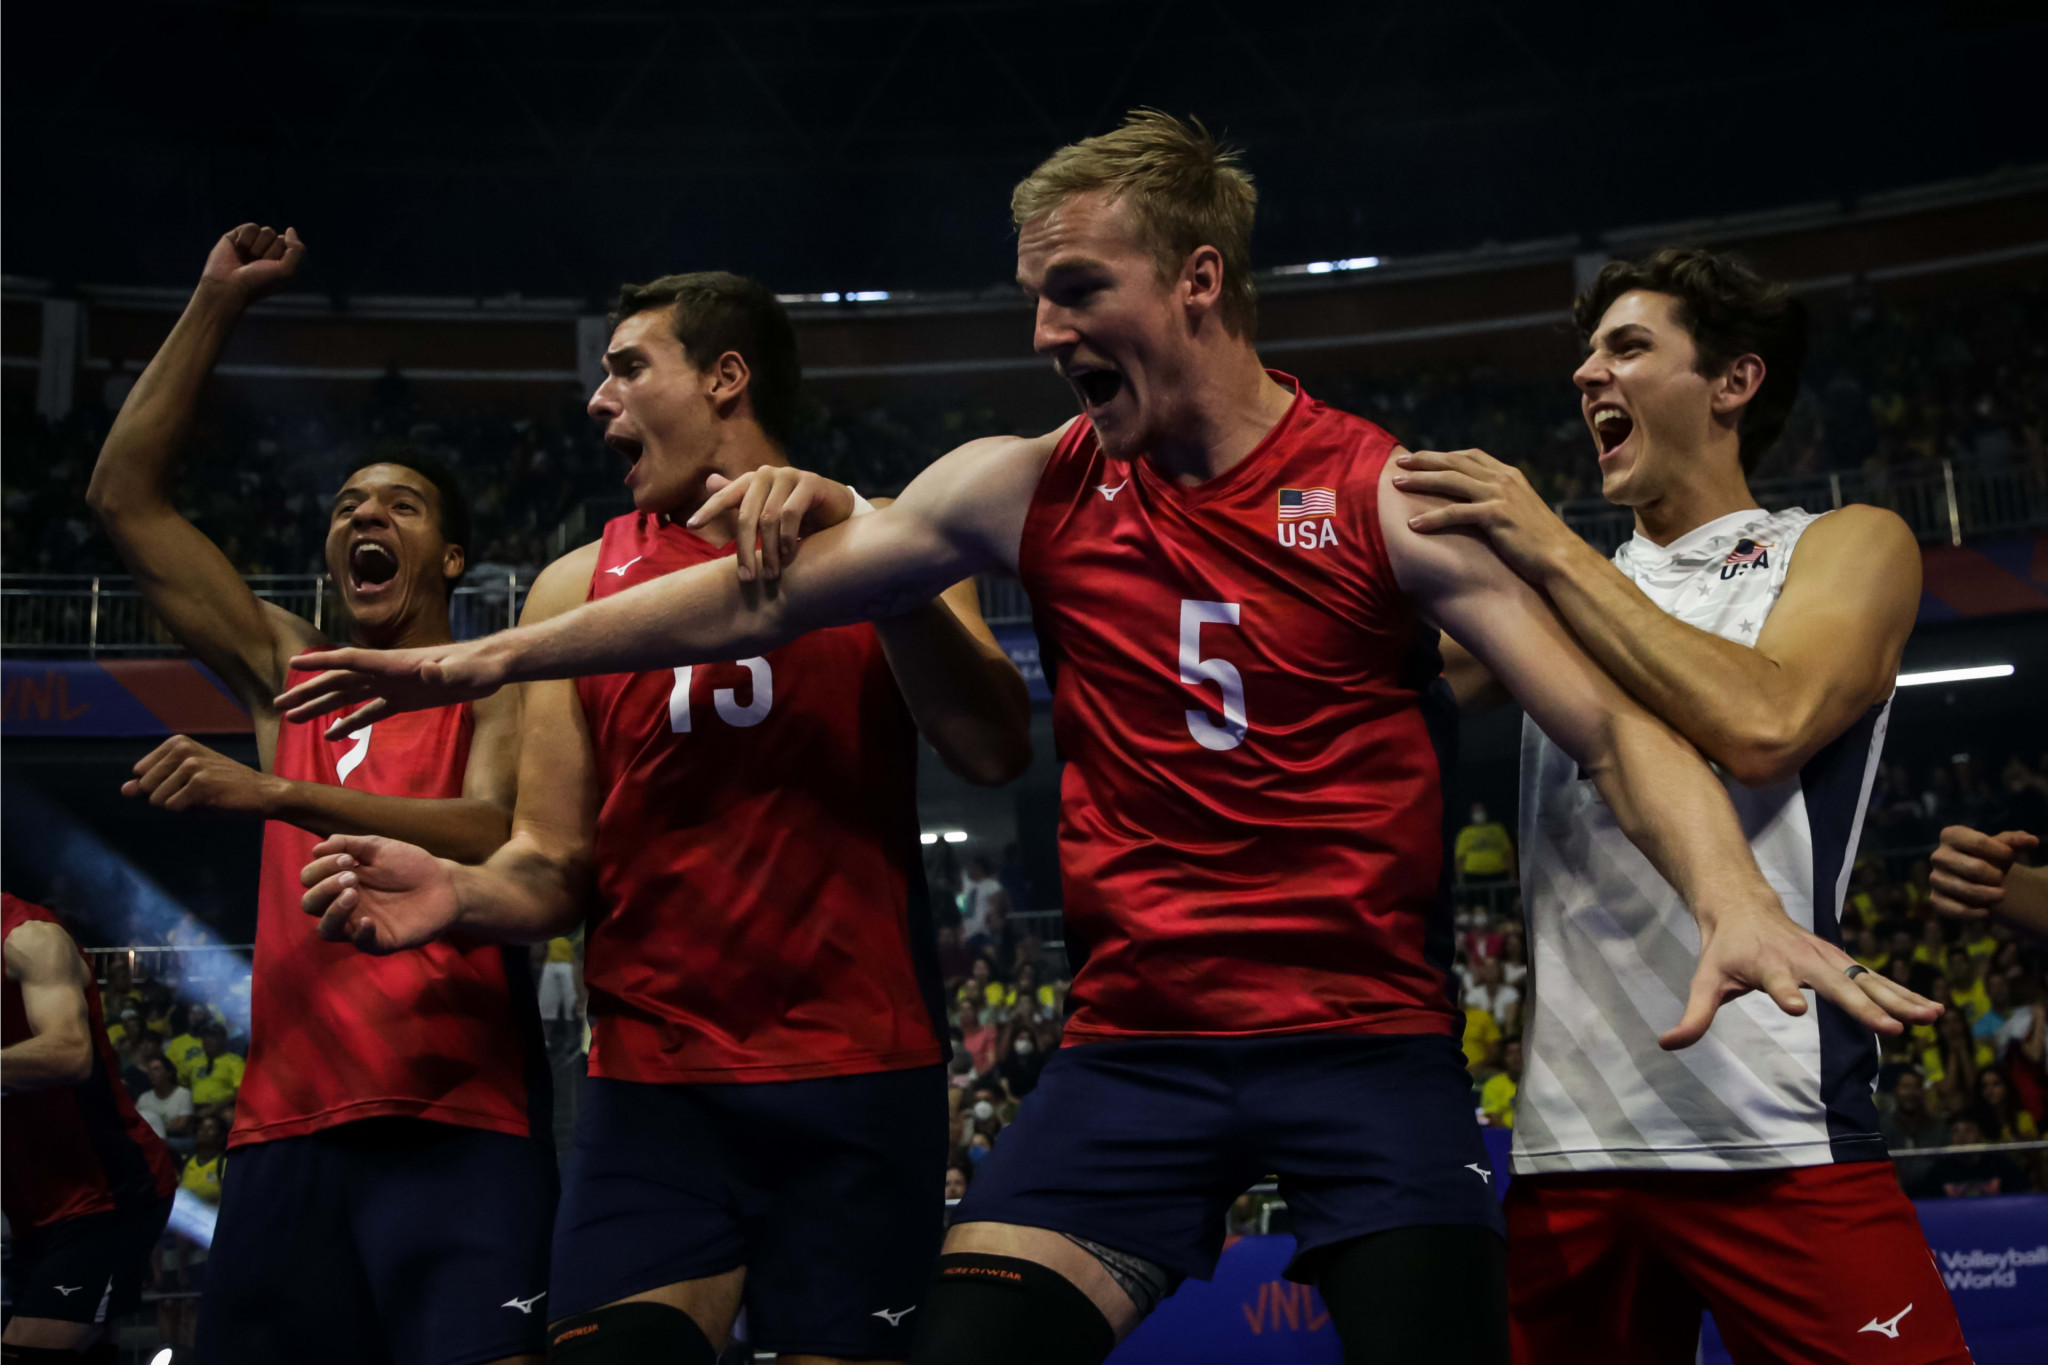 Volleyball World agrees partnerships with clothing brand and betting firm